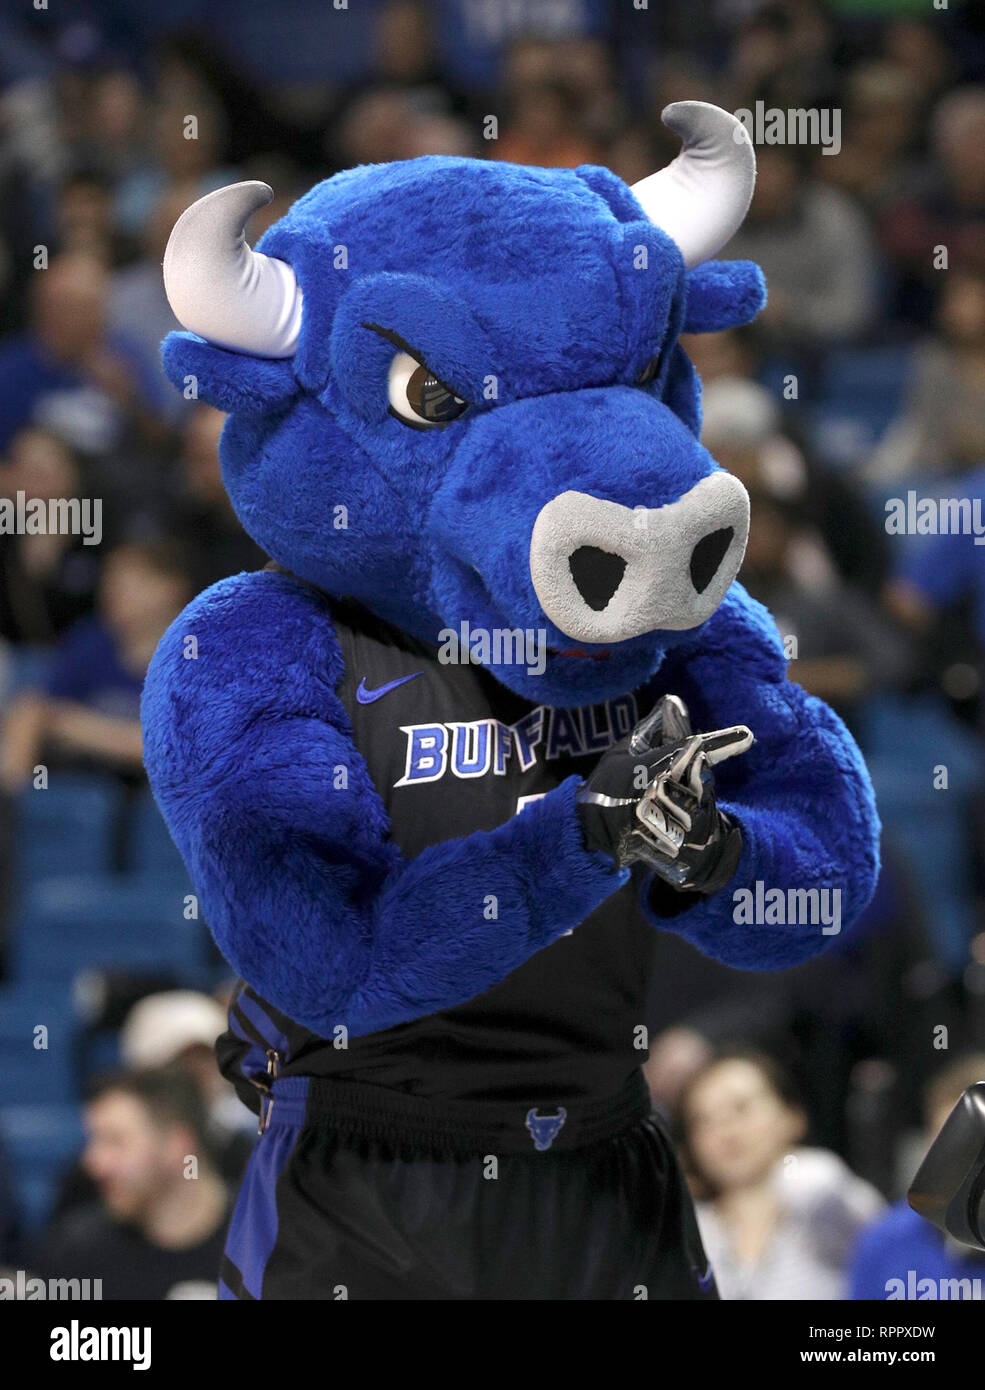 Amherst, New York, USA. Feb 22, 2019: Buffalo Bulls mascot Victor E. Bull prior to thte start of the first half of play in the NCAA Basketball game between the Kent State Golden Flashes and Buffalo Bulls at Alumni Arena in Amherst, N.Y. (Nicholas T. LoVerde/Cal Sport Media) Credit: Cal Sport Media/Alamy Live News Stock Photo